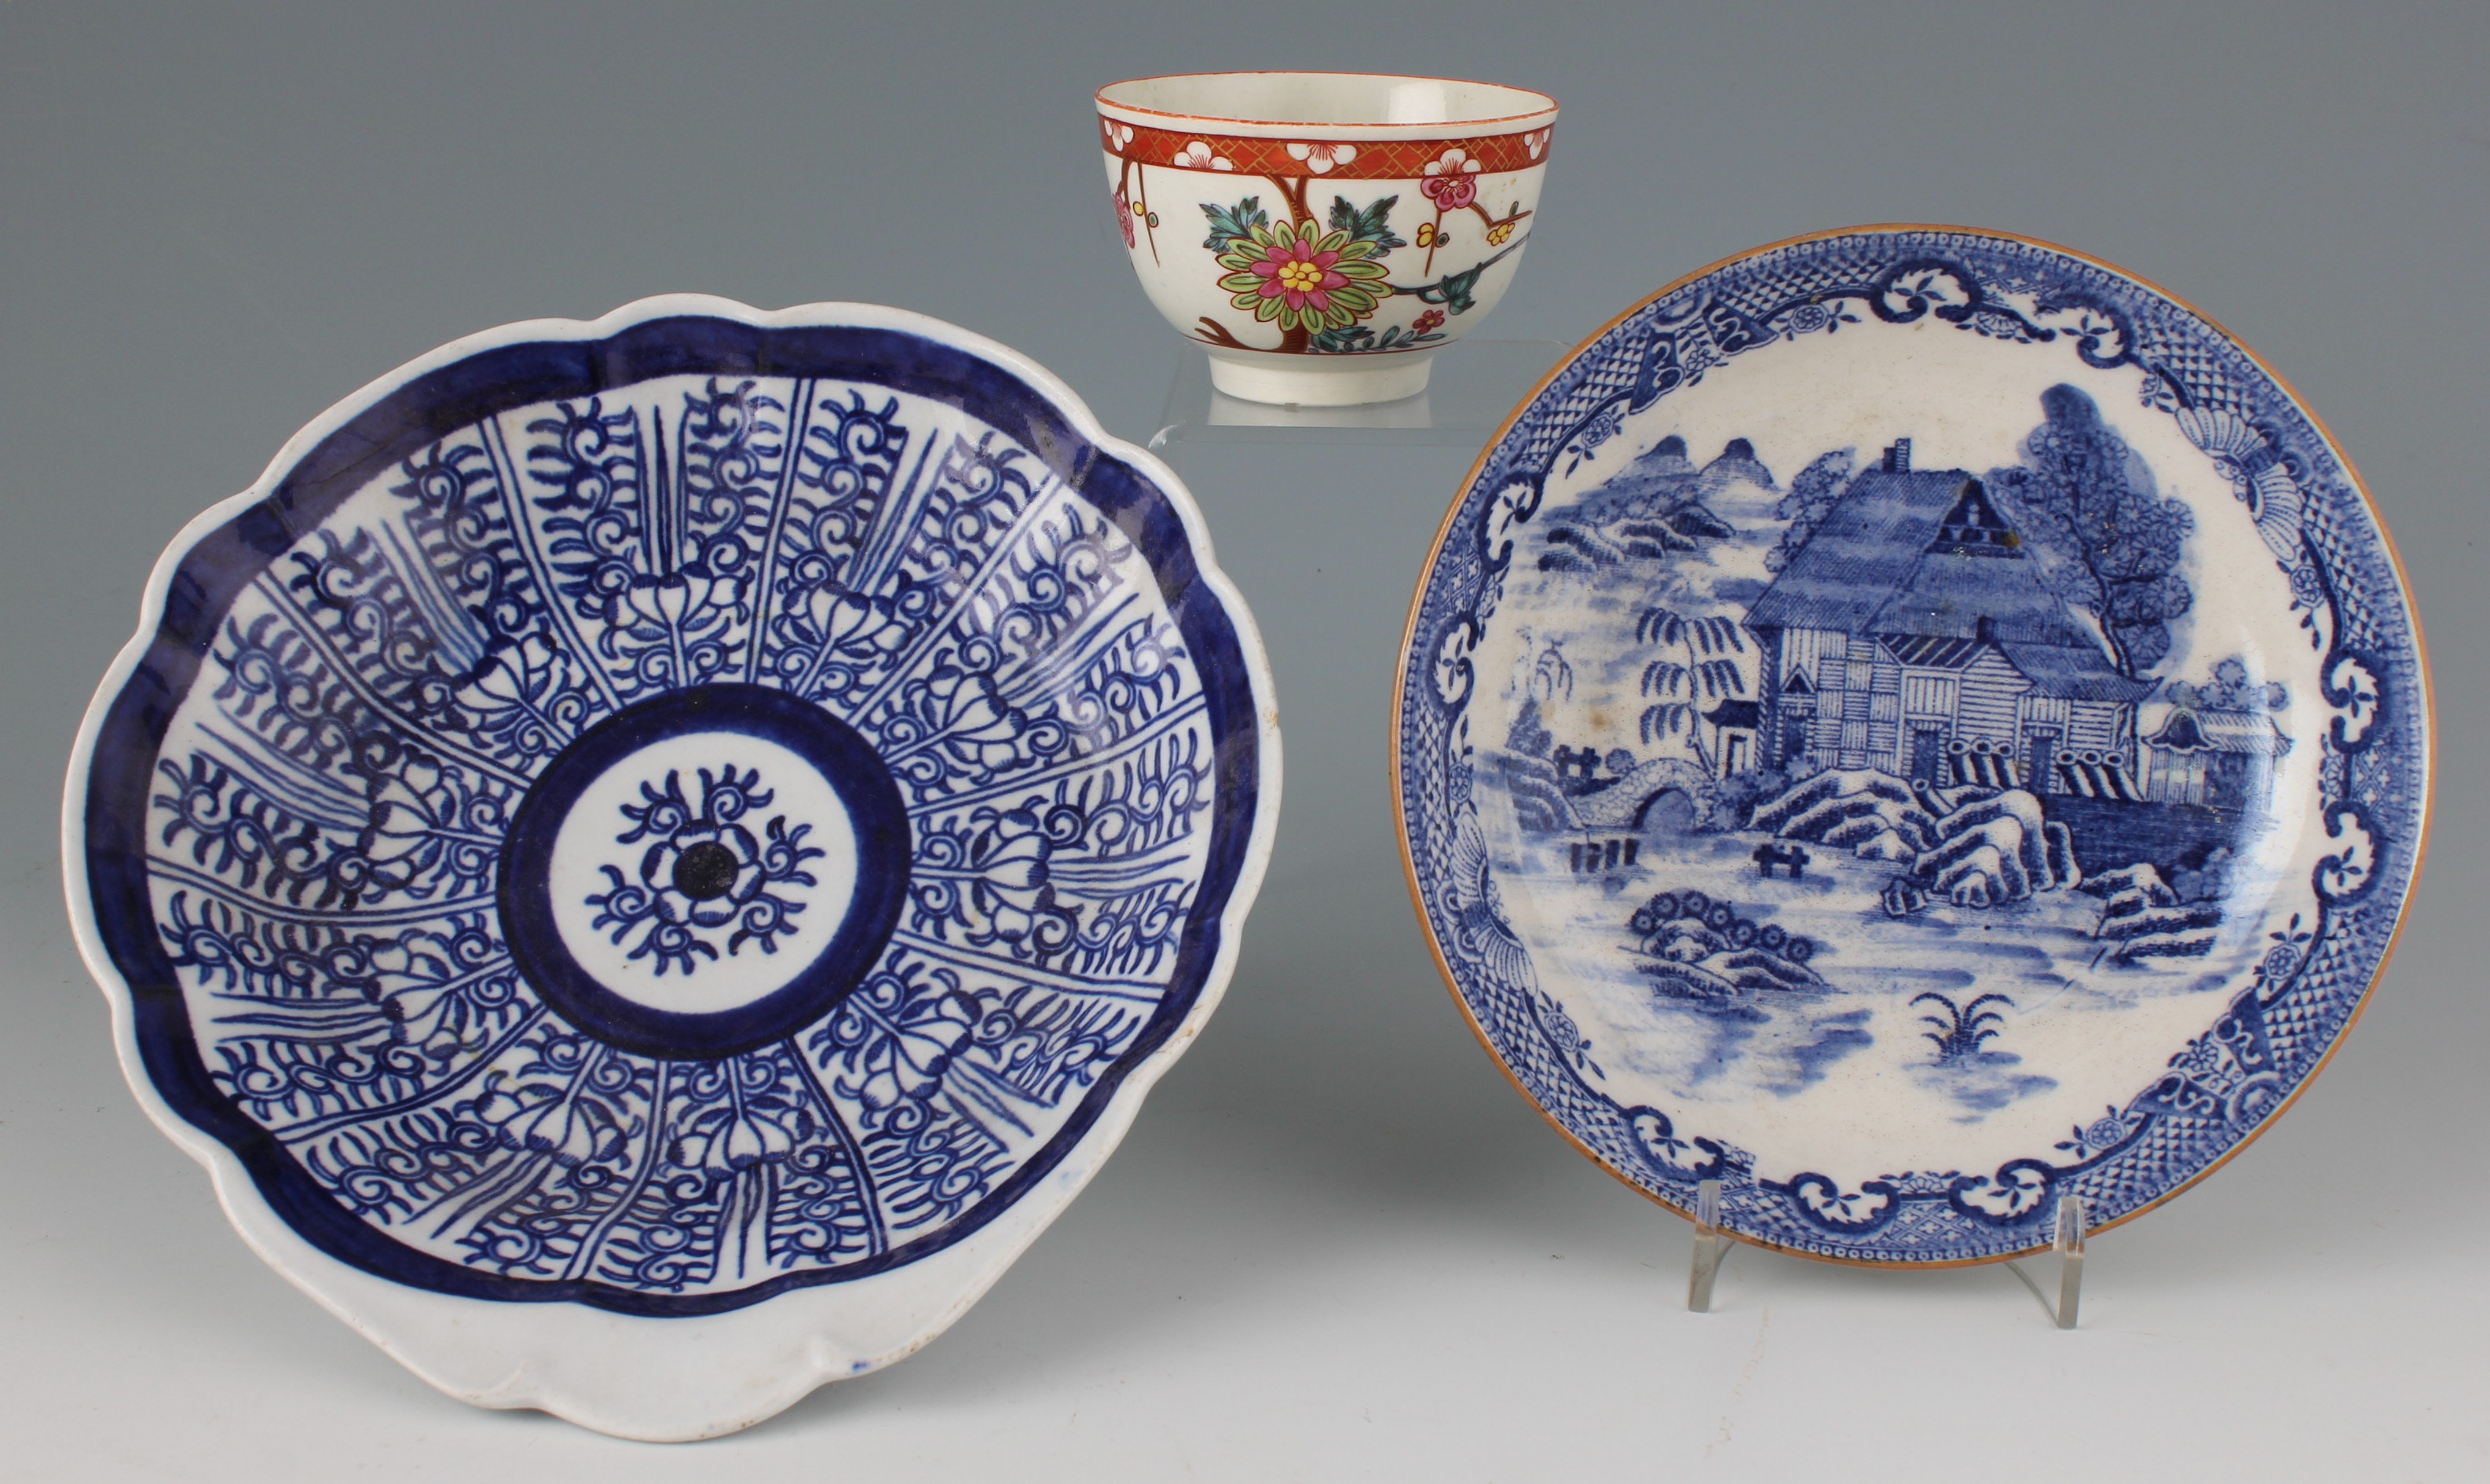 Three pieces of 18th Century English soft paste porcelain to include tea bowl with polychrome